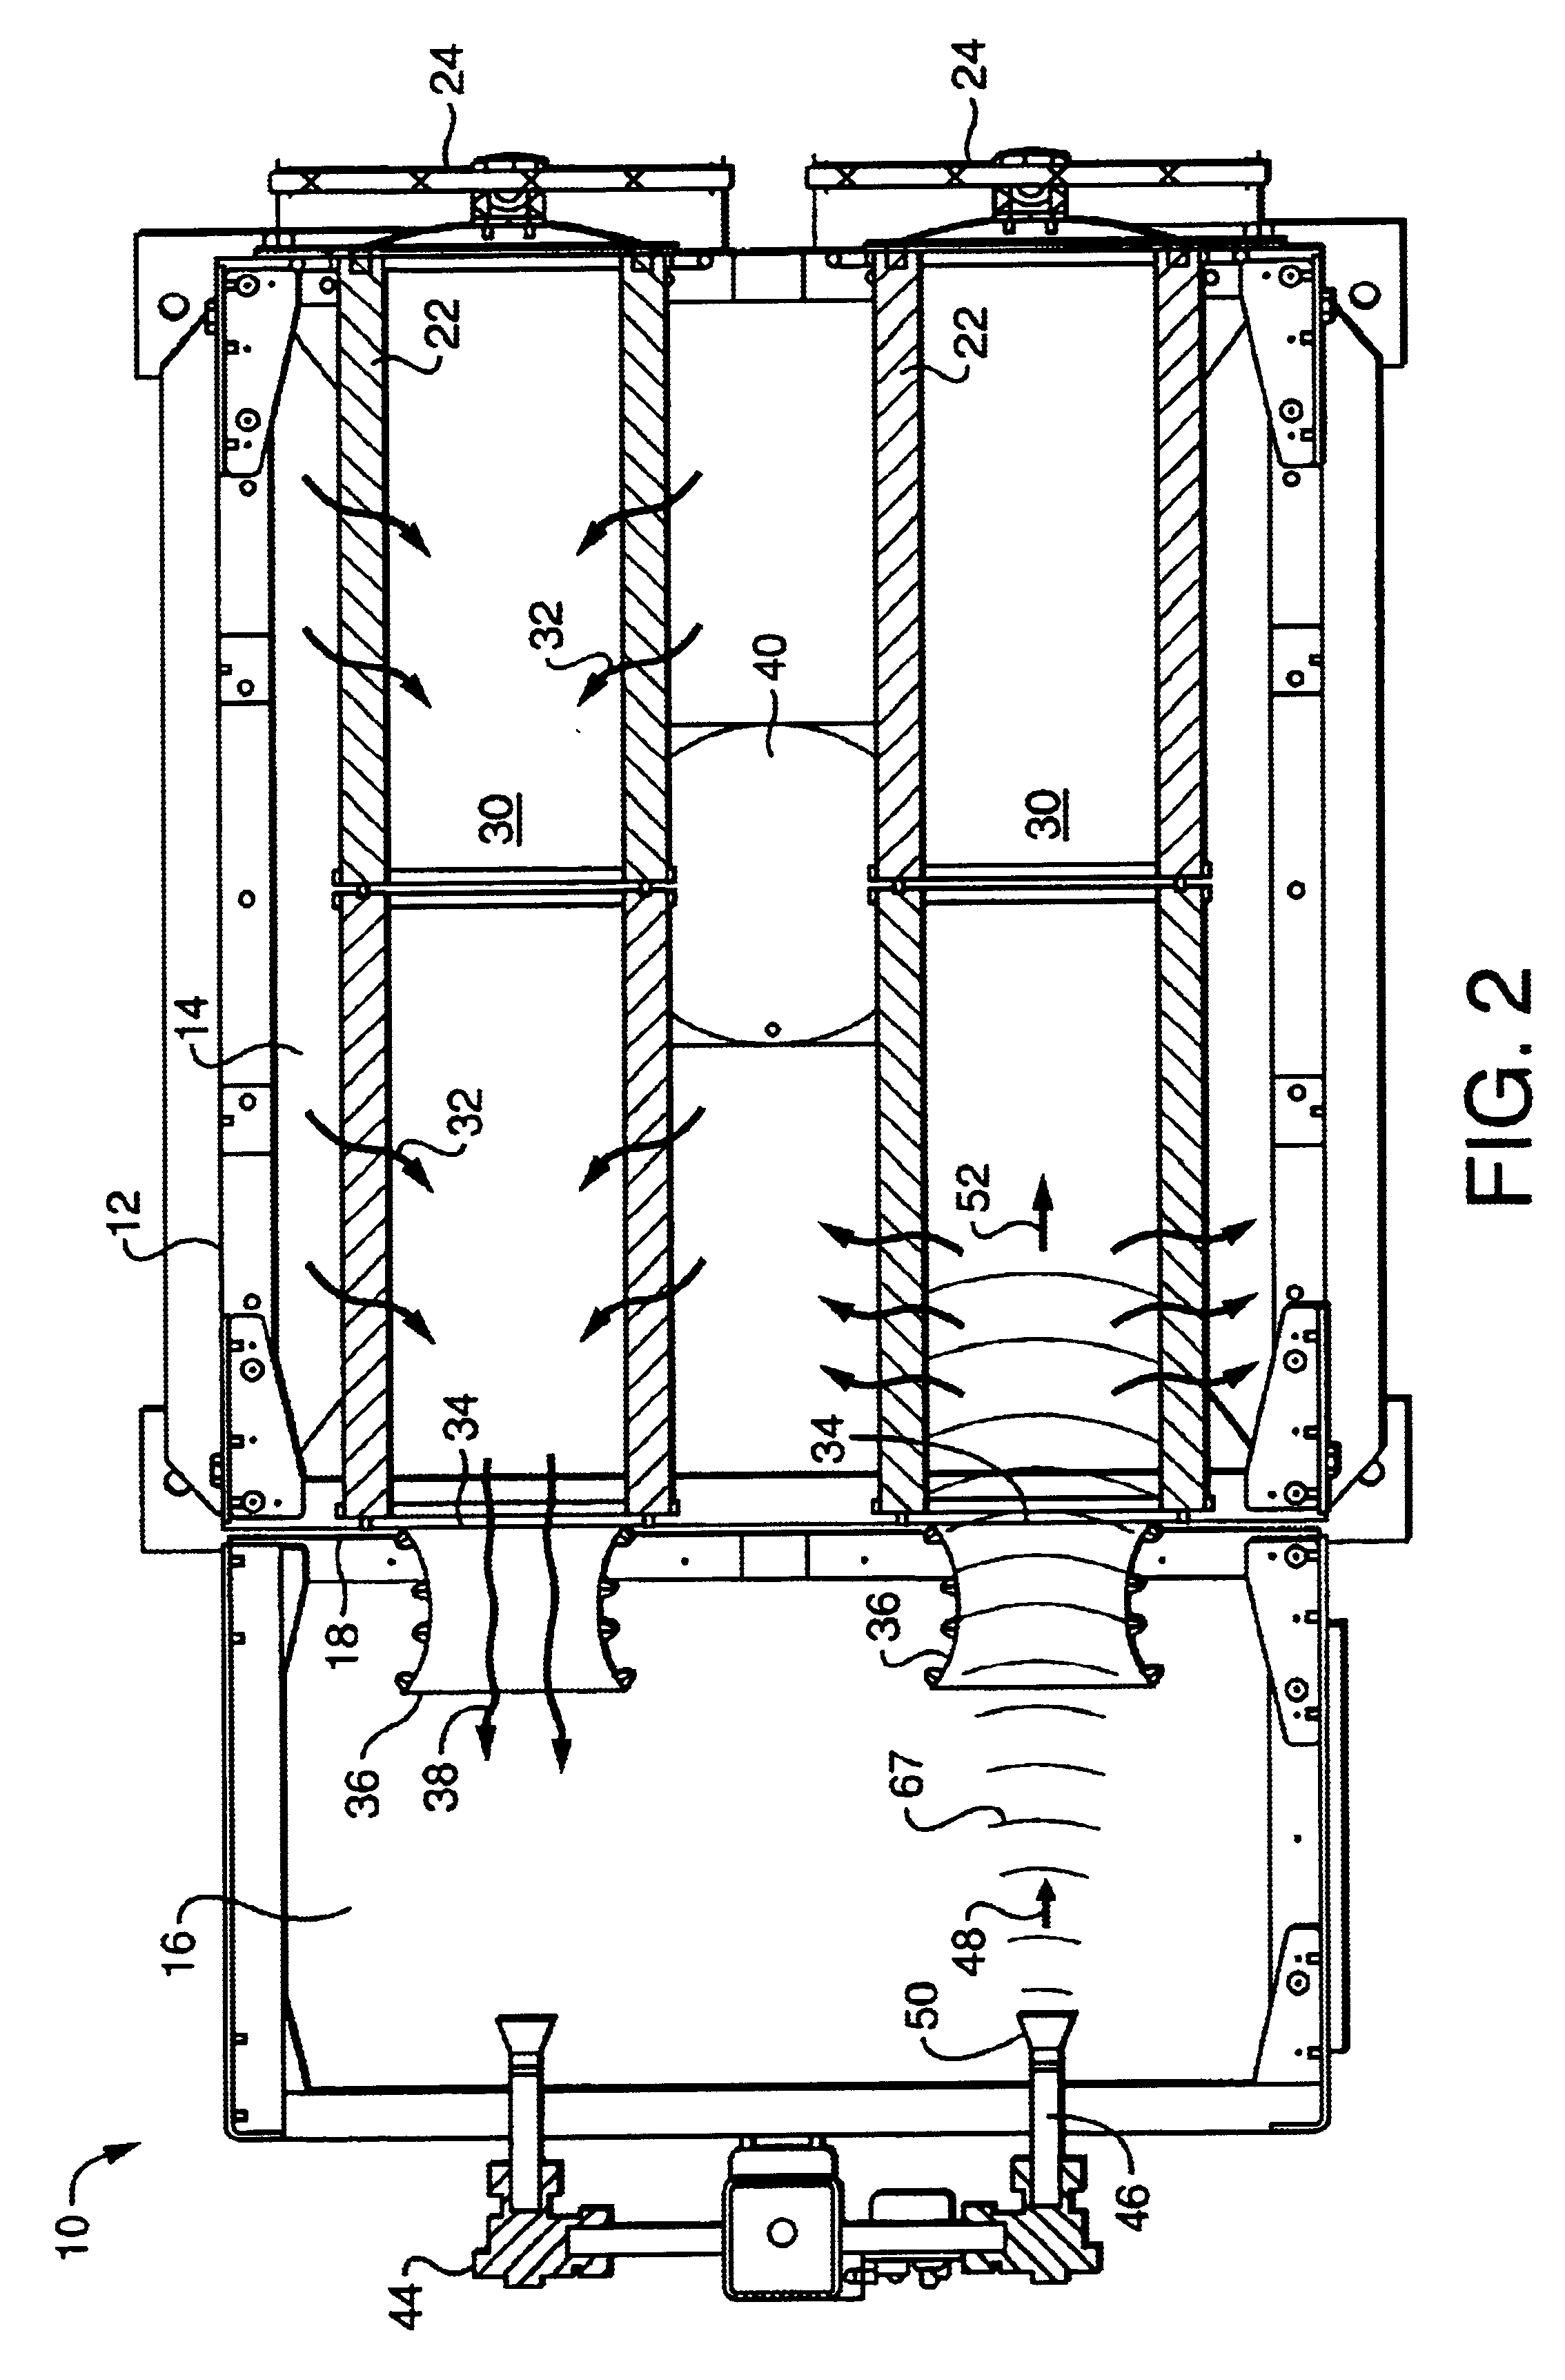 Apparatus and method for cleaning an air filter unit